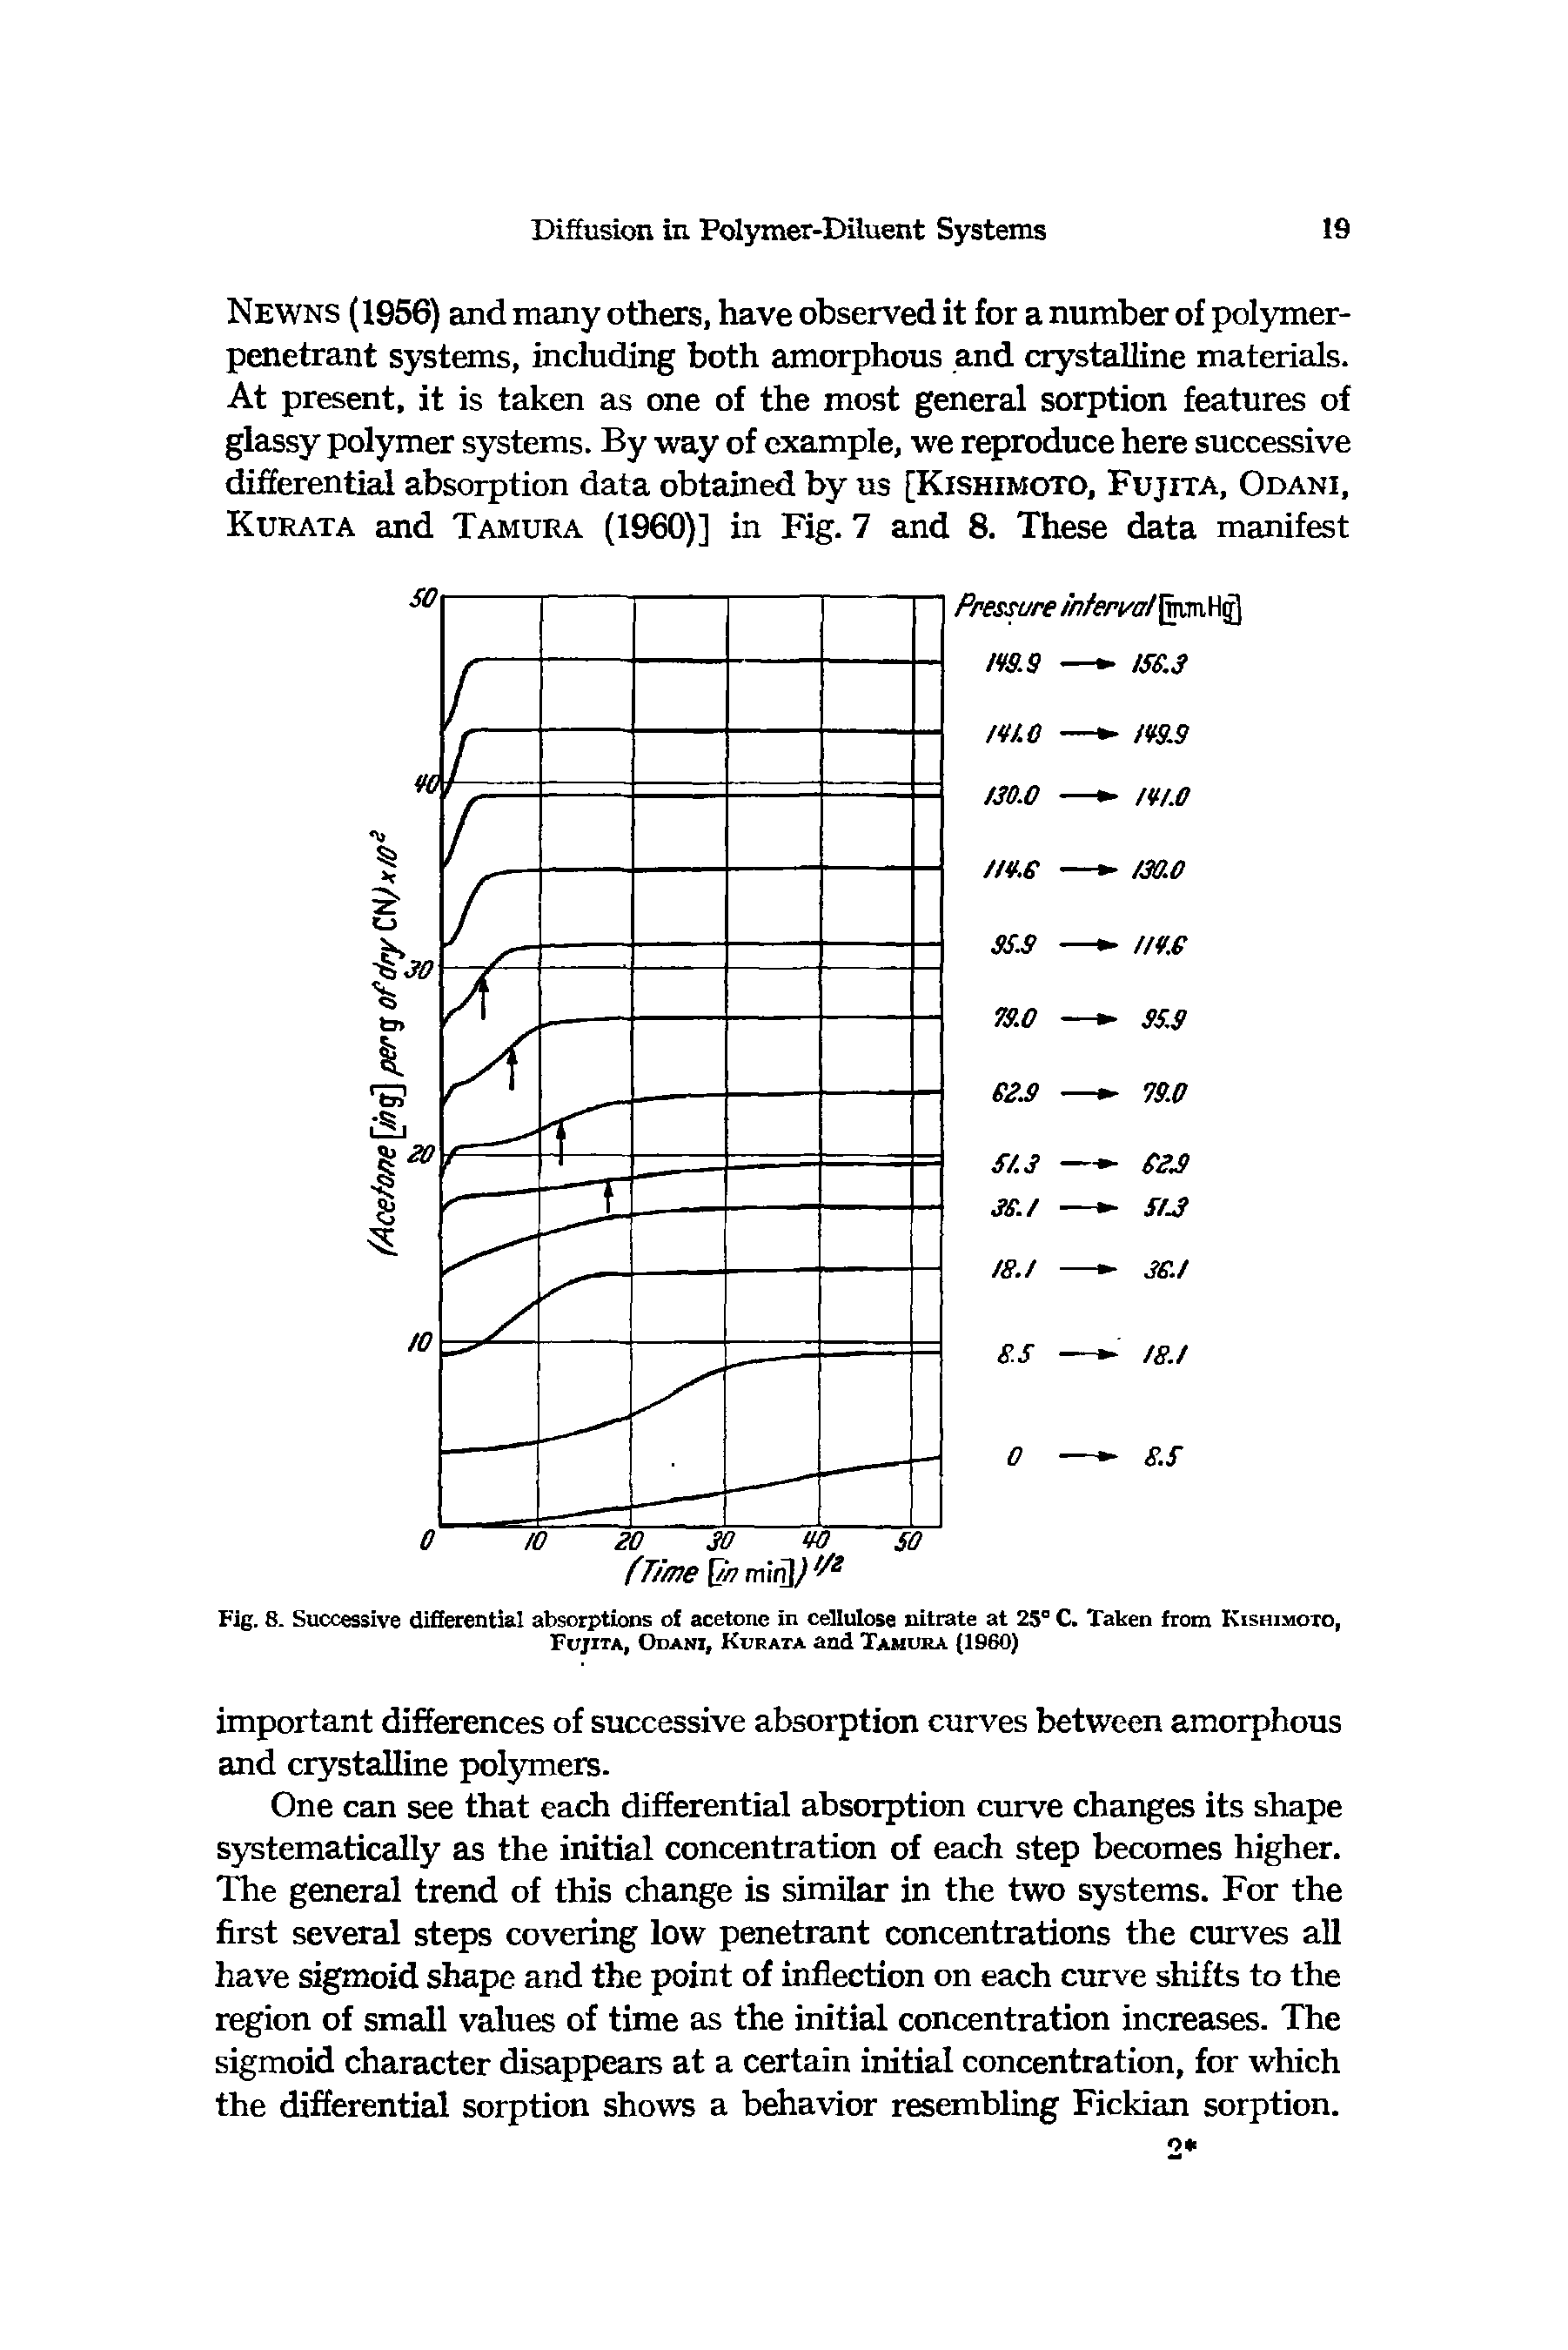 Fig. 8. Successive differential absorptions of acetone in cellulose nitrate at 25° C. Taken from Kishimoto, Fc/jita, Odani, Kurata and Tamura (1960)...